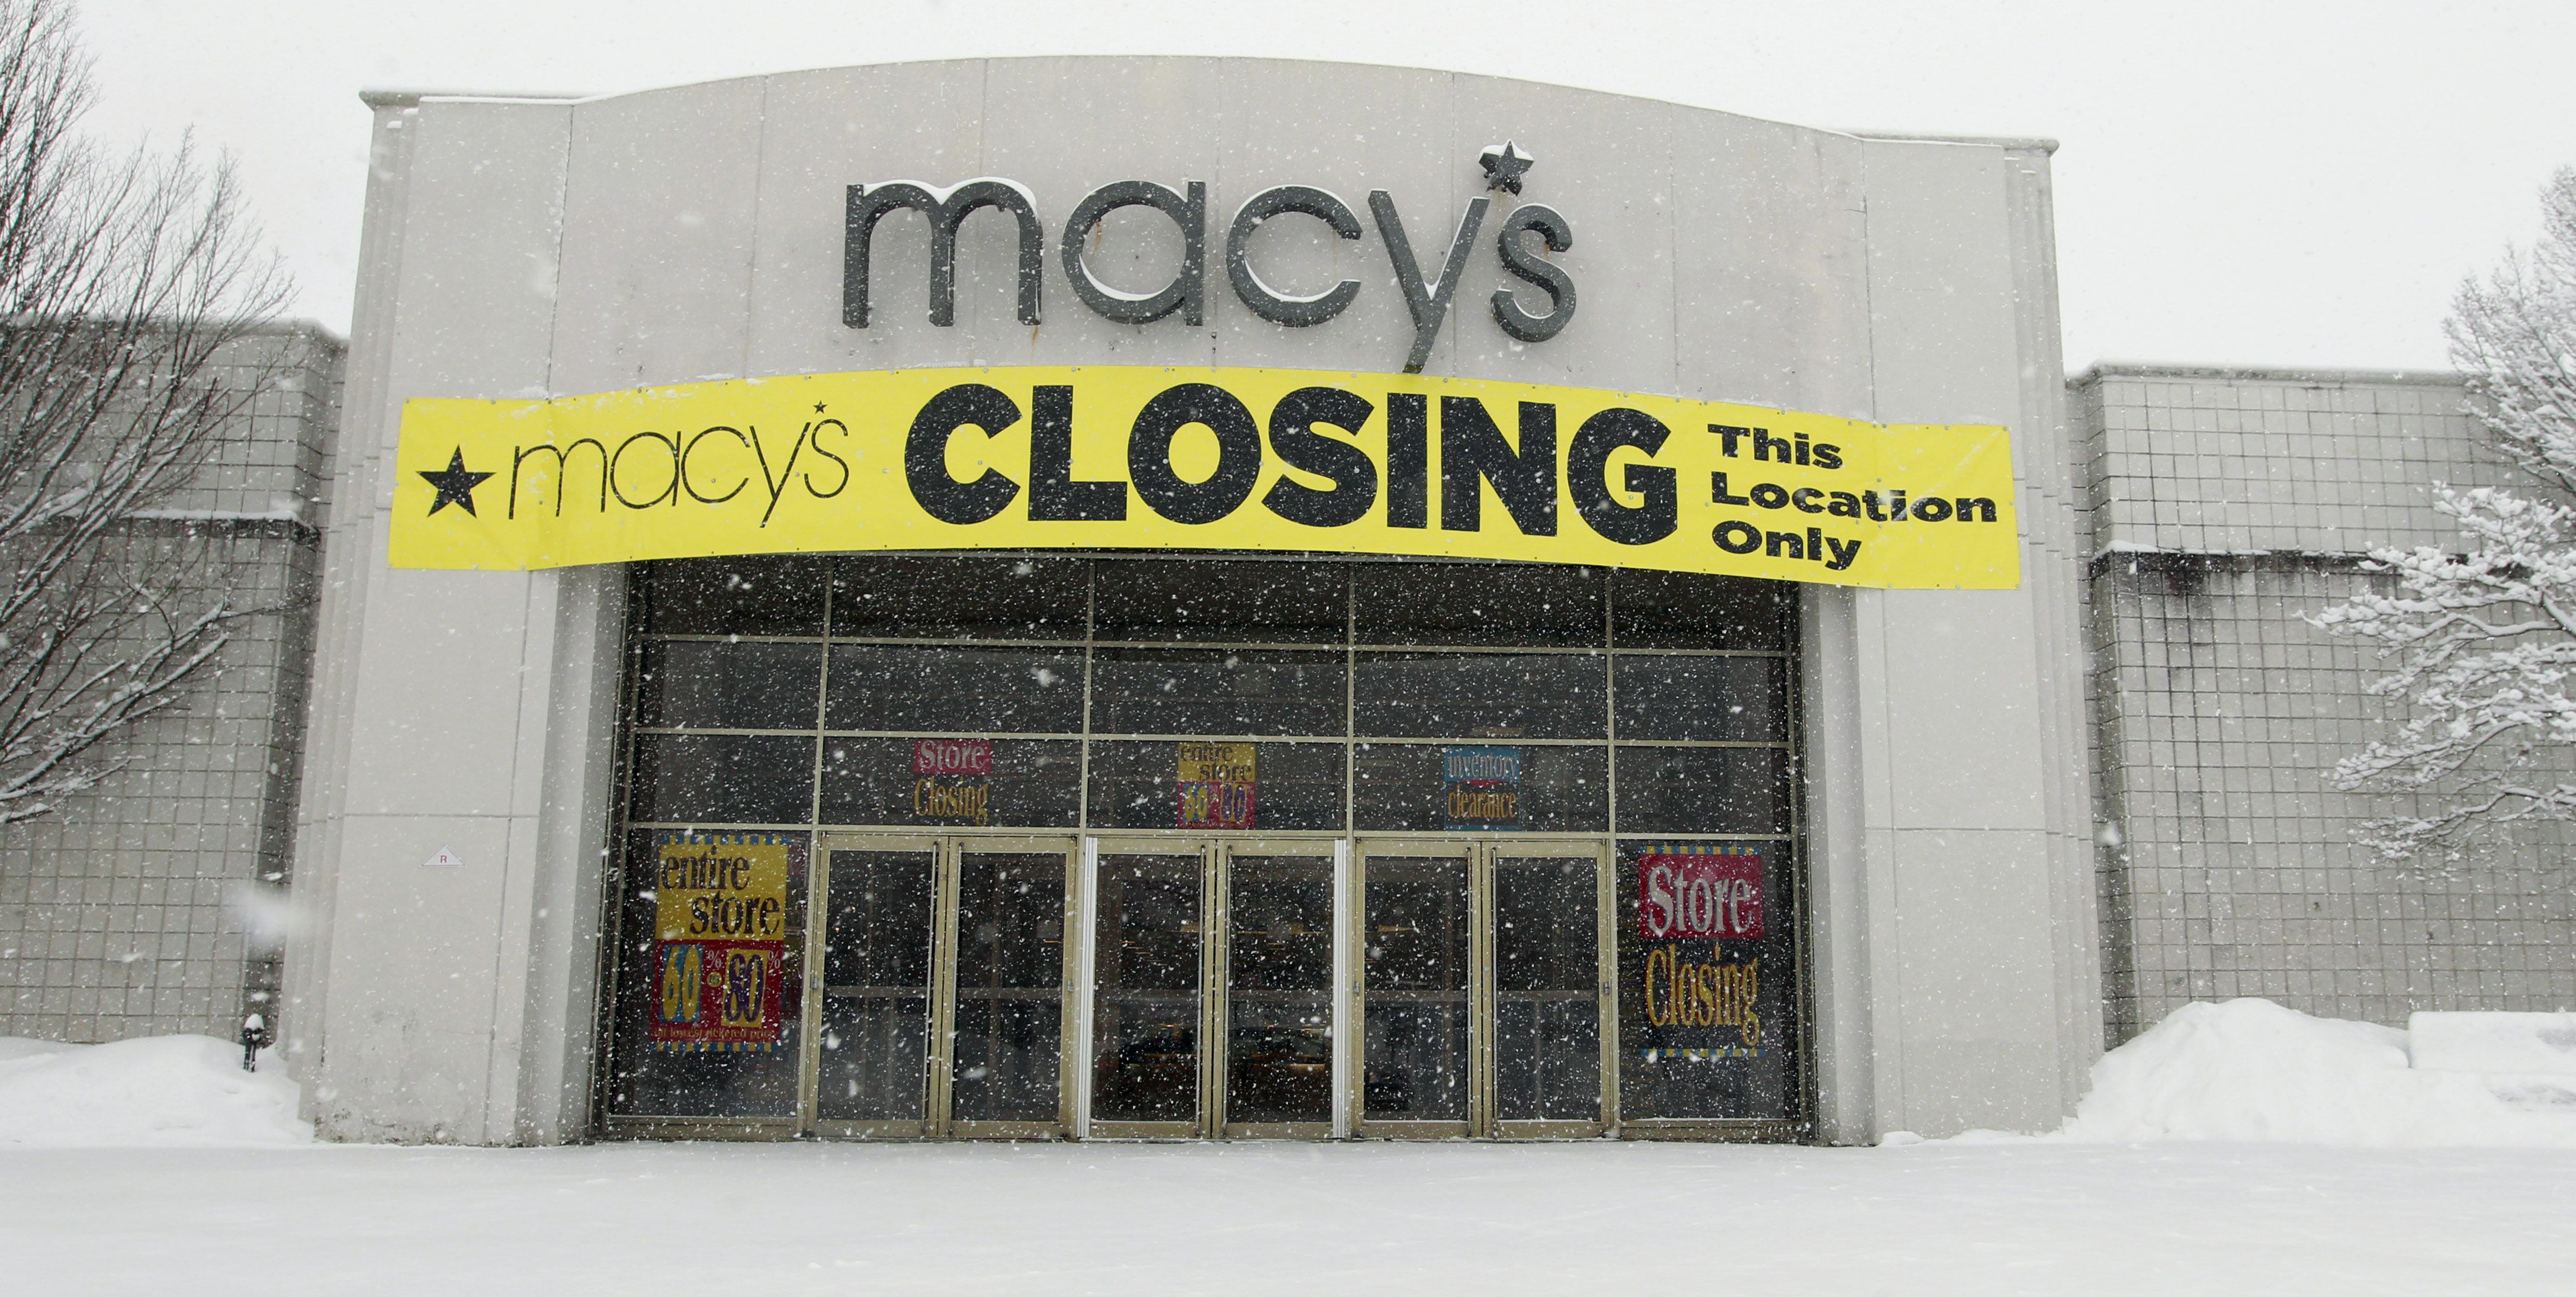 Smaller-format Macy's store coming to valley